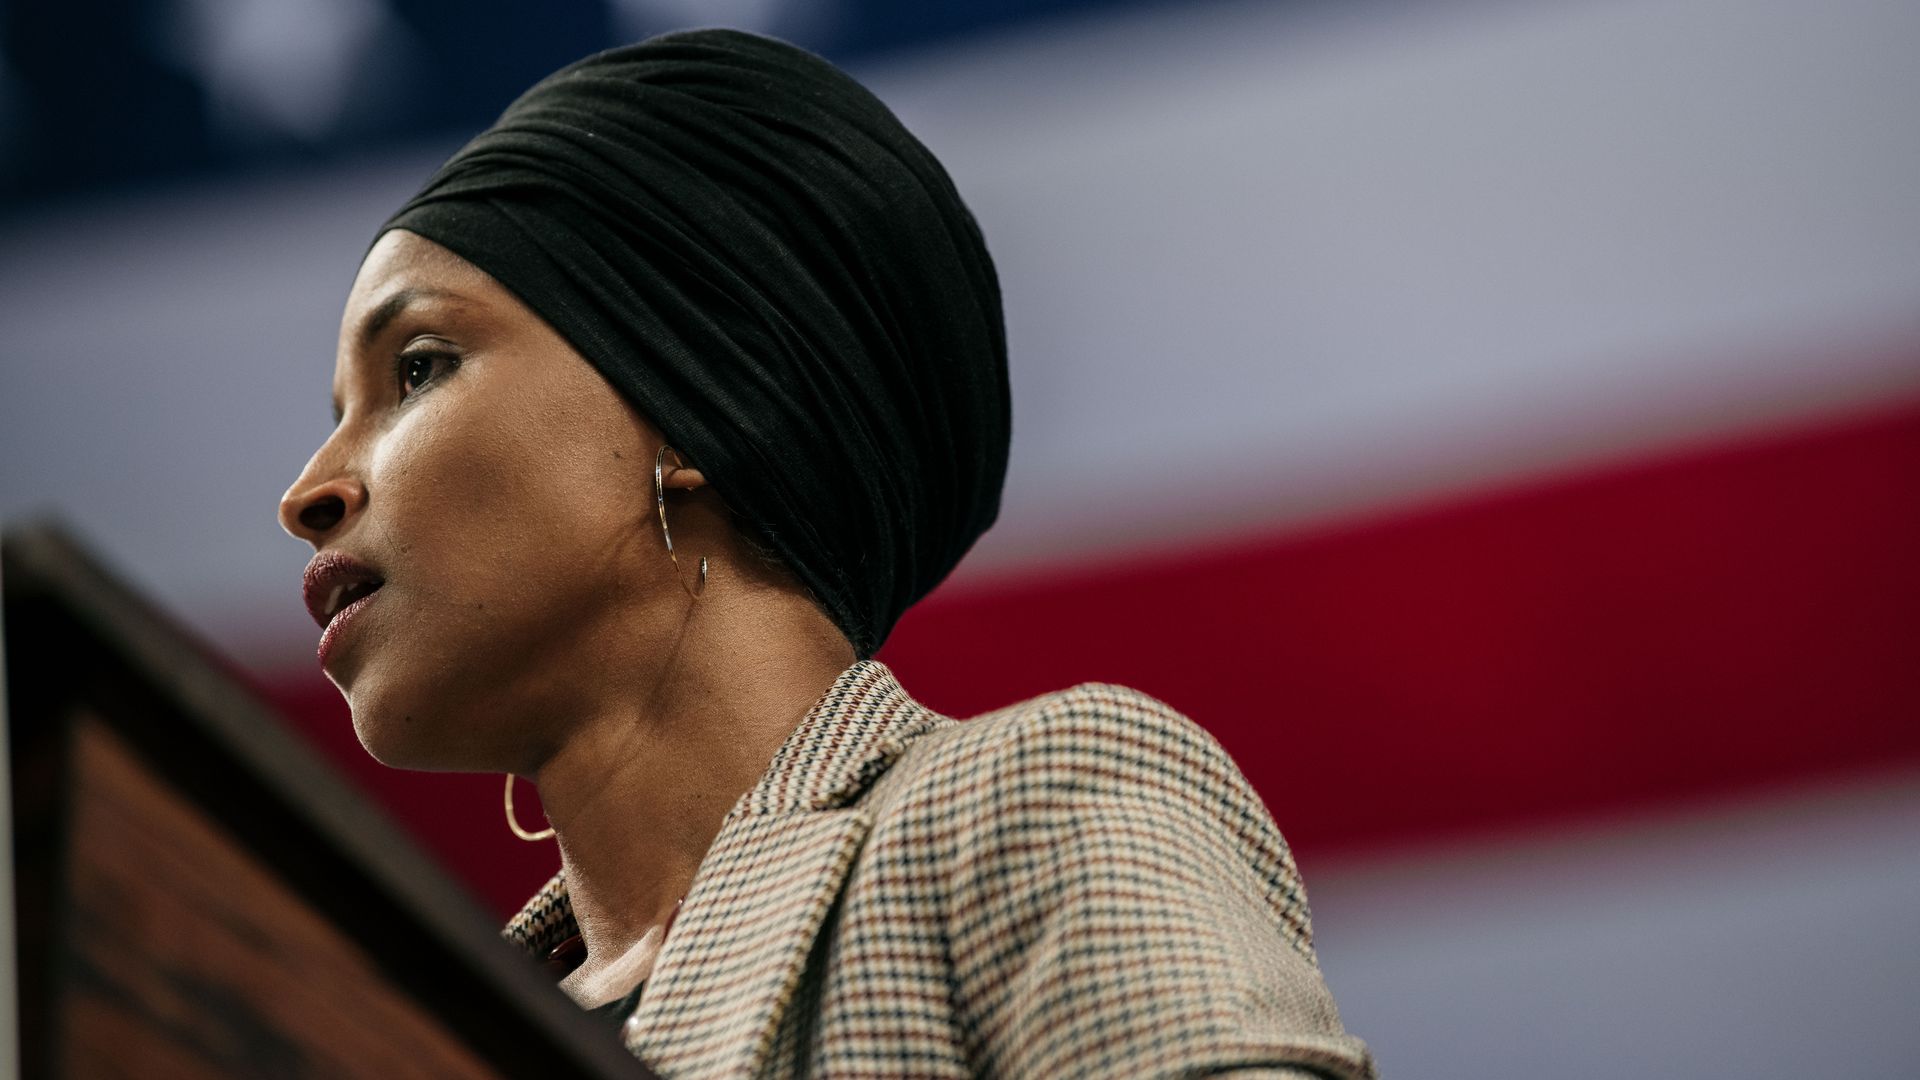 In this image, Omar stands in front of a podium with a large American flag behind her.